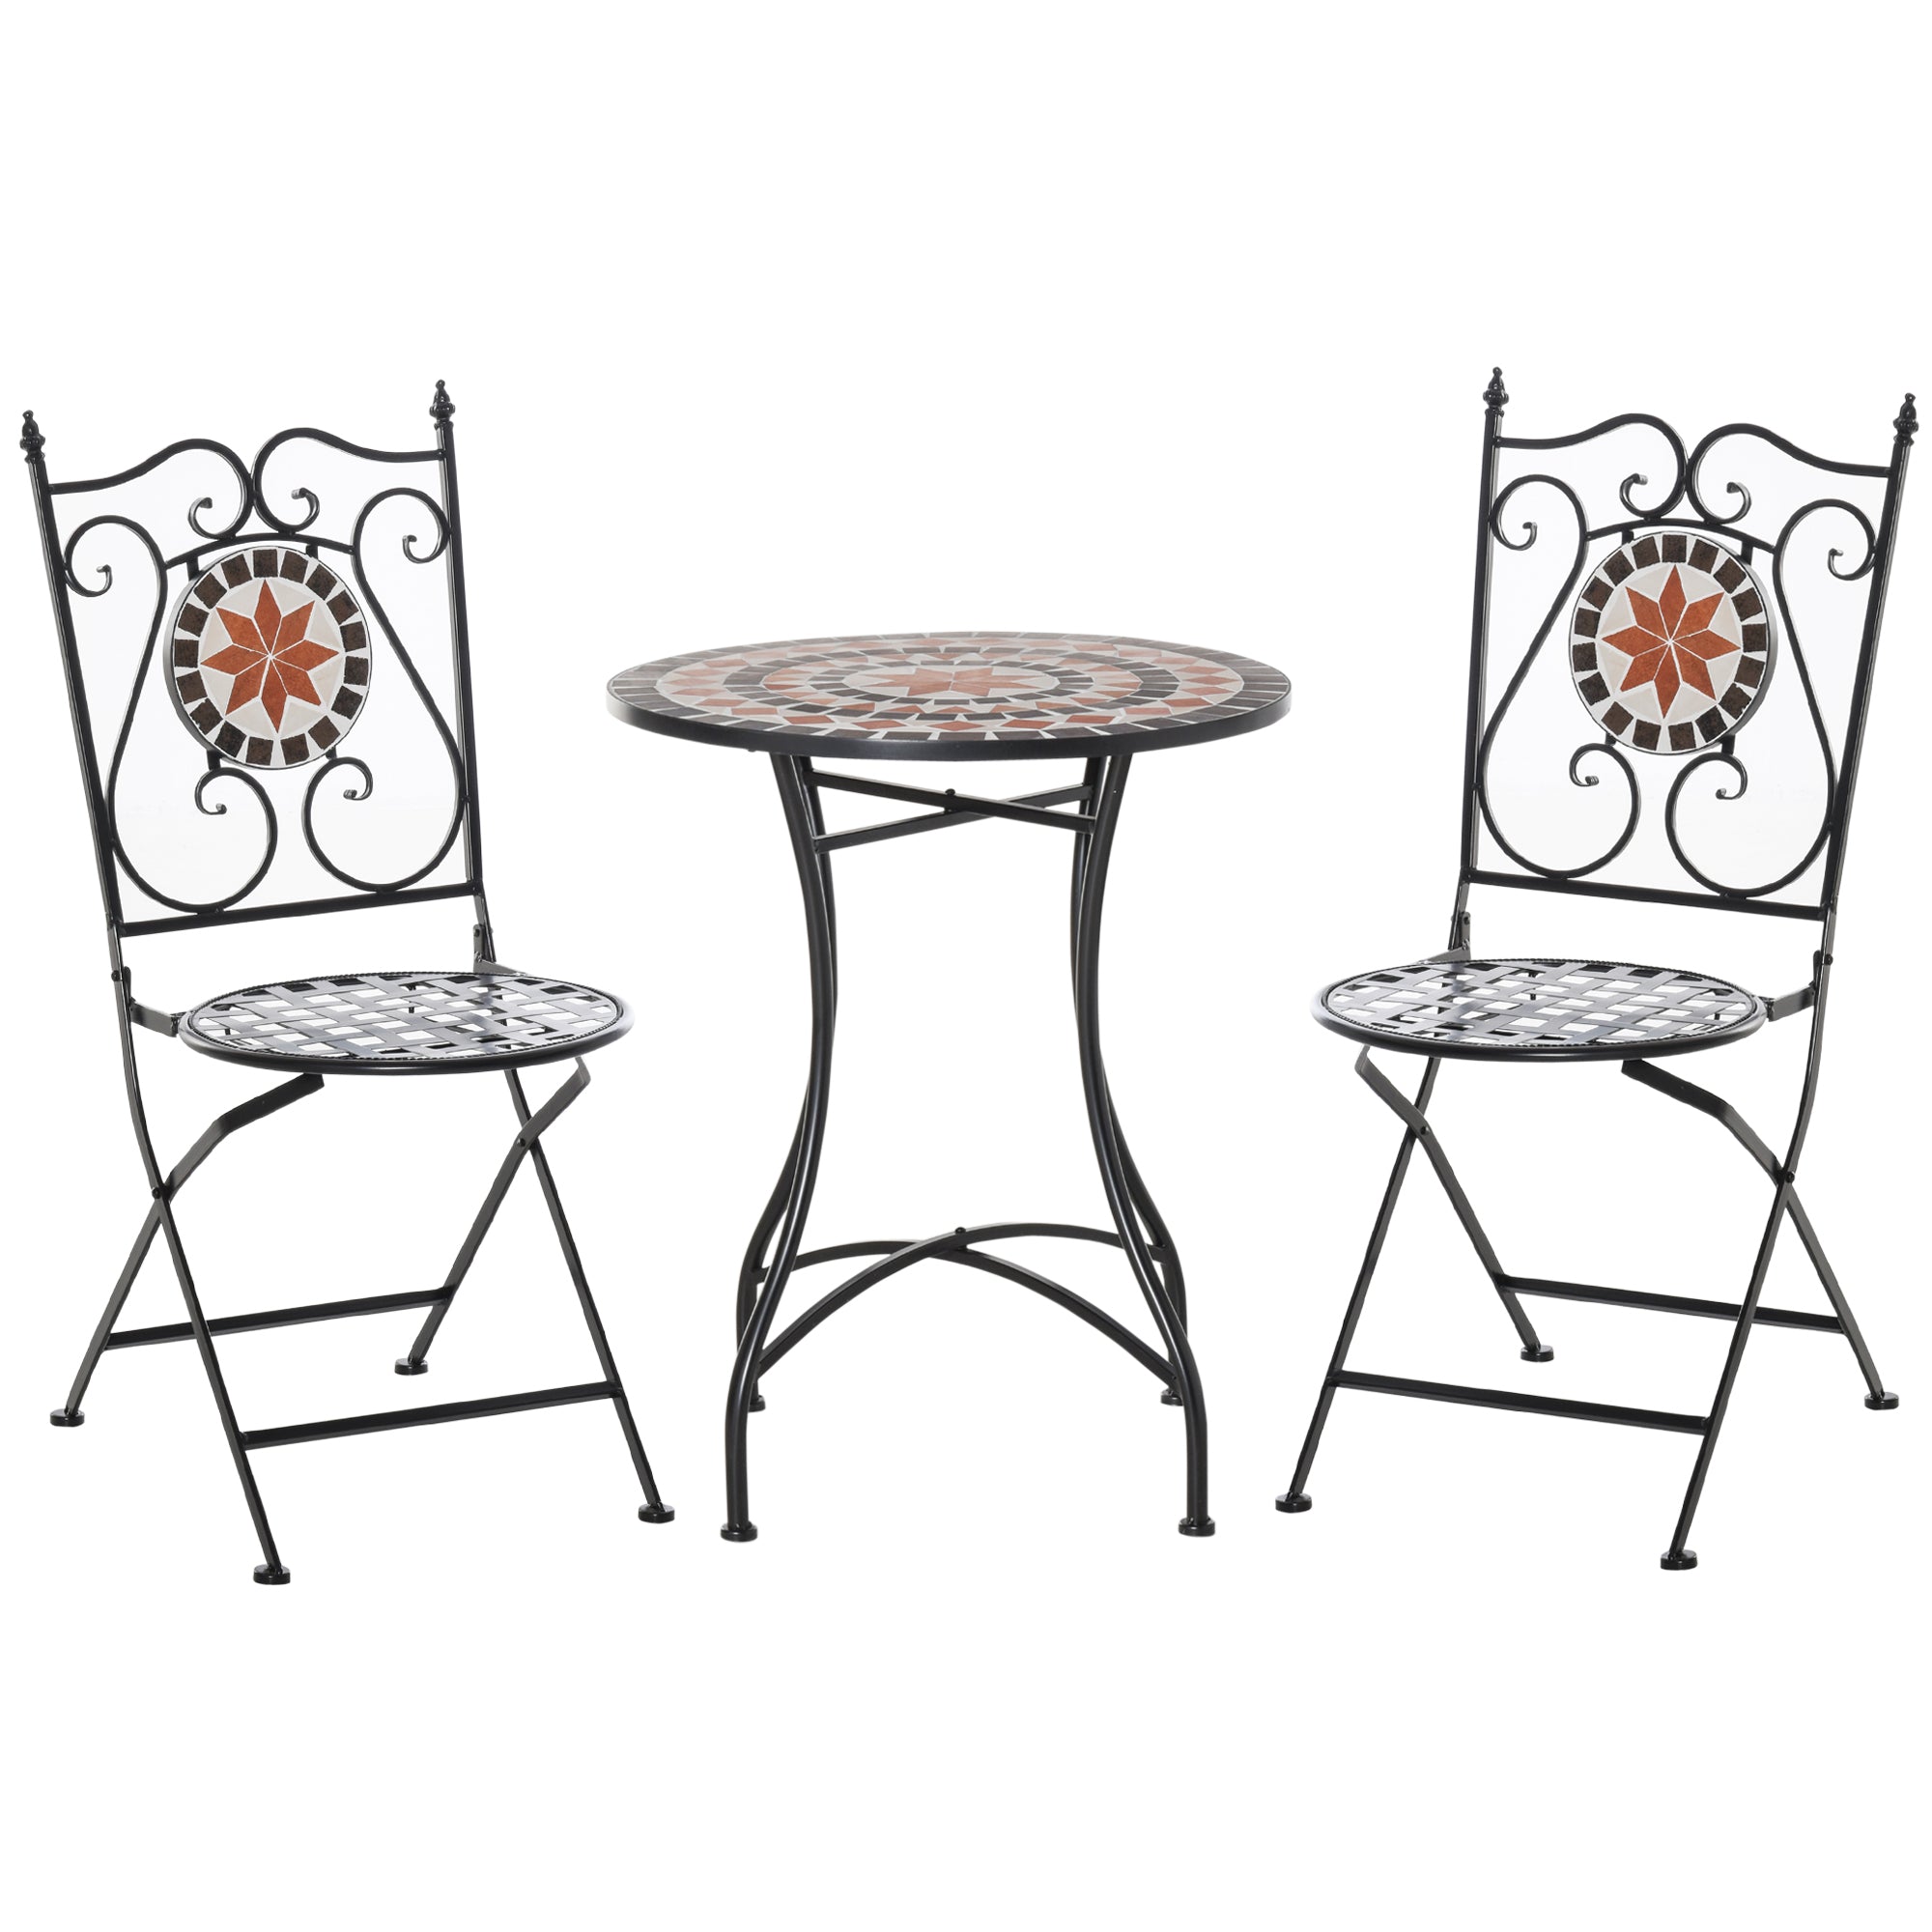 Nancy's Bettendorf Garden Set Group - 3-Piece Mosaic Table - 2 Folding Chairs - Metal - Multicolored